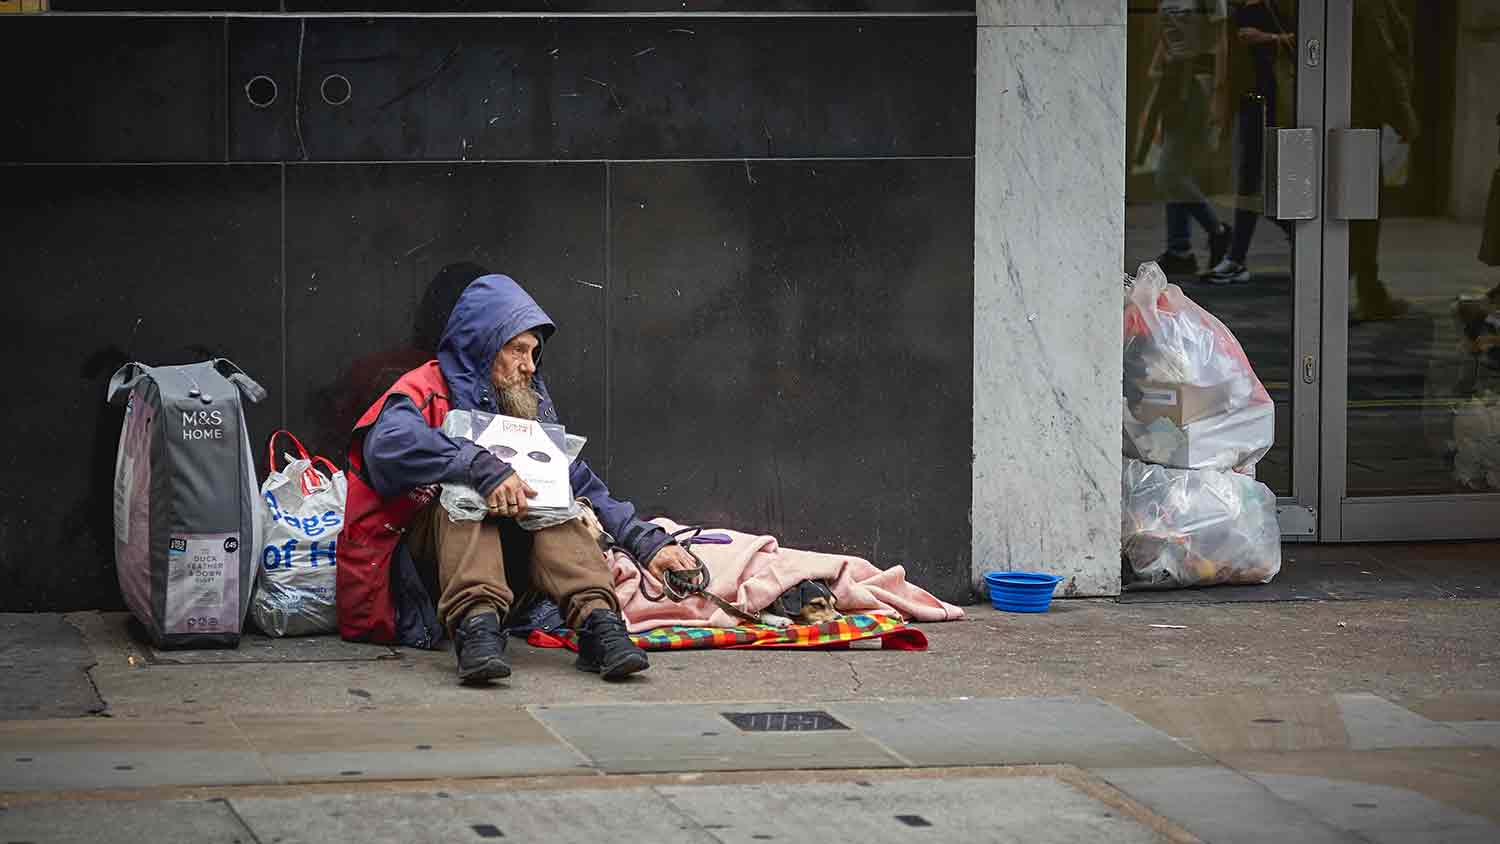 Homeless man with his belongings sat on a street. He is also holding onto a dog lead. His dog sits under a blanker next to him.